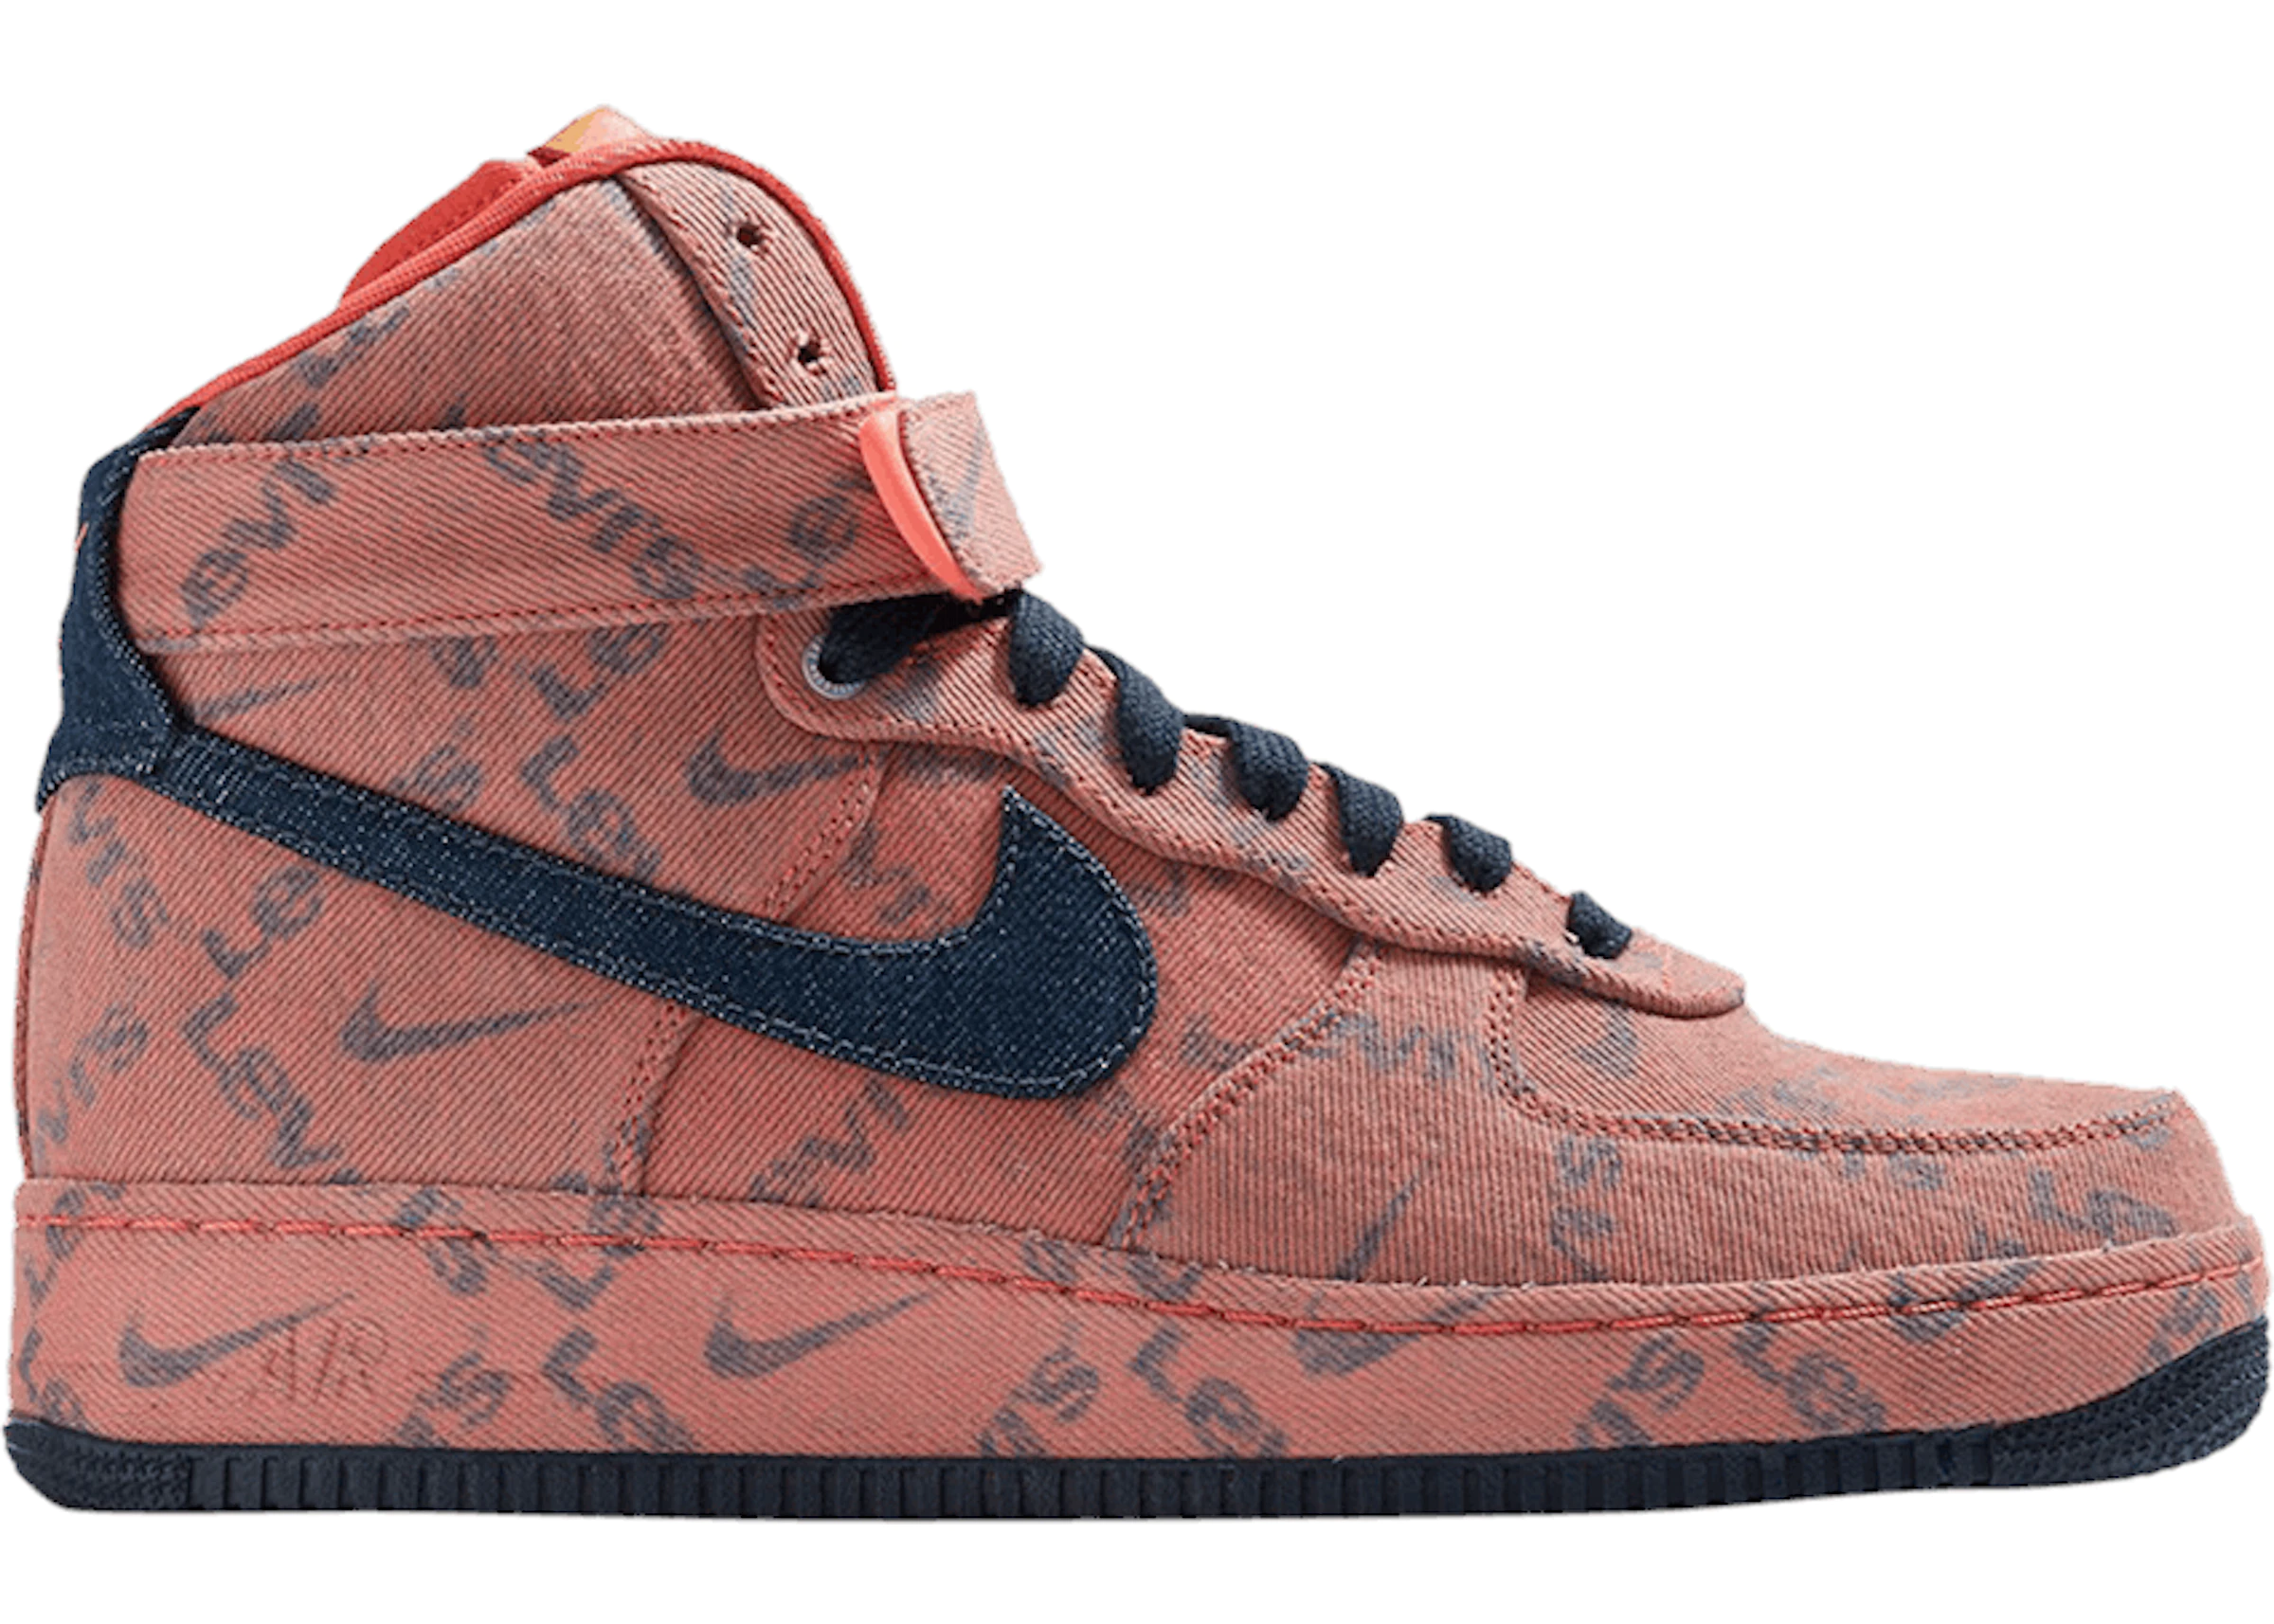 Inactief Ontembare rand Nike Air Force 1 High Levi's Exclusive Denim - CV0672-844 - US